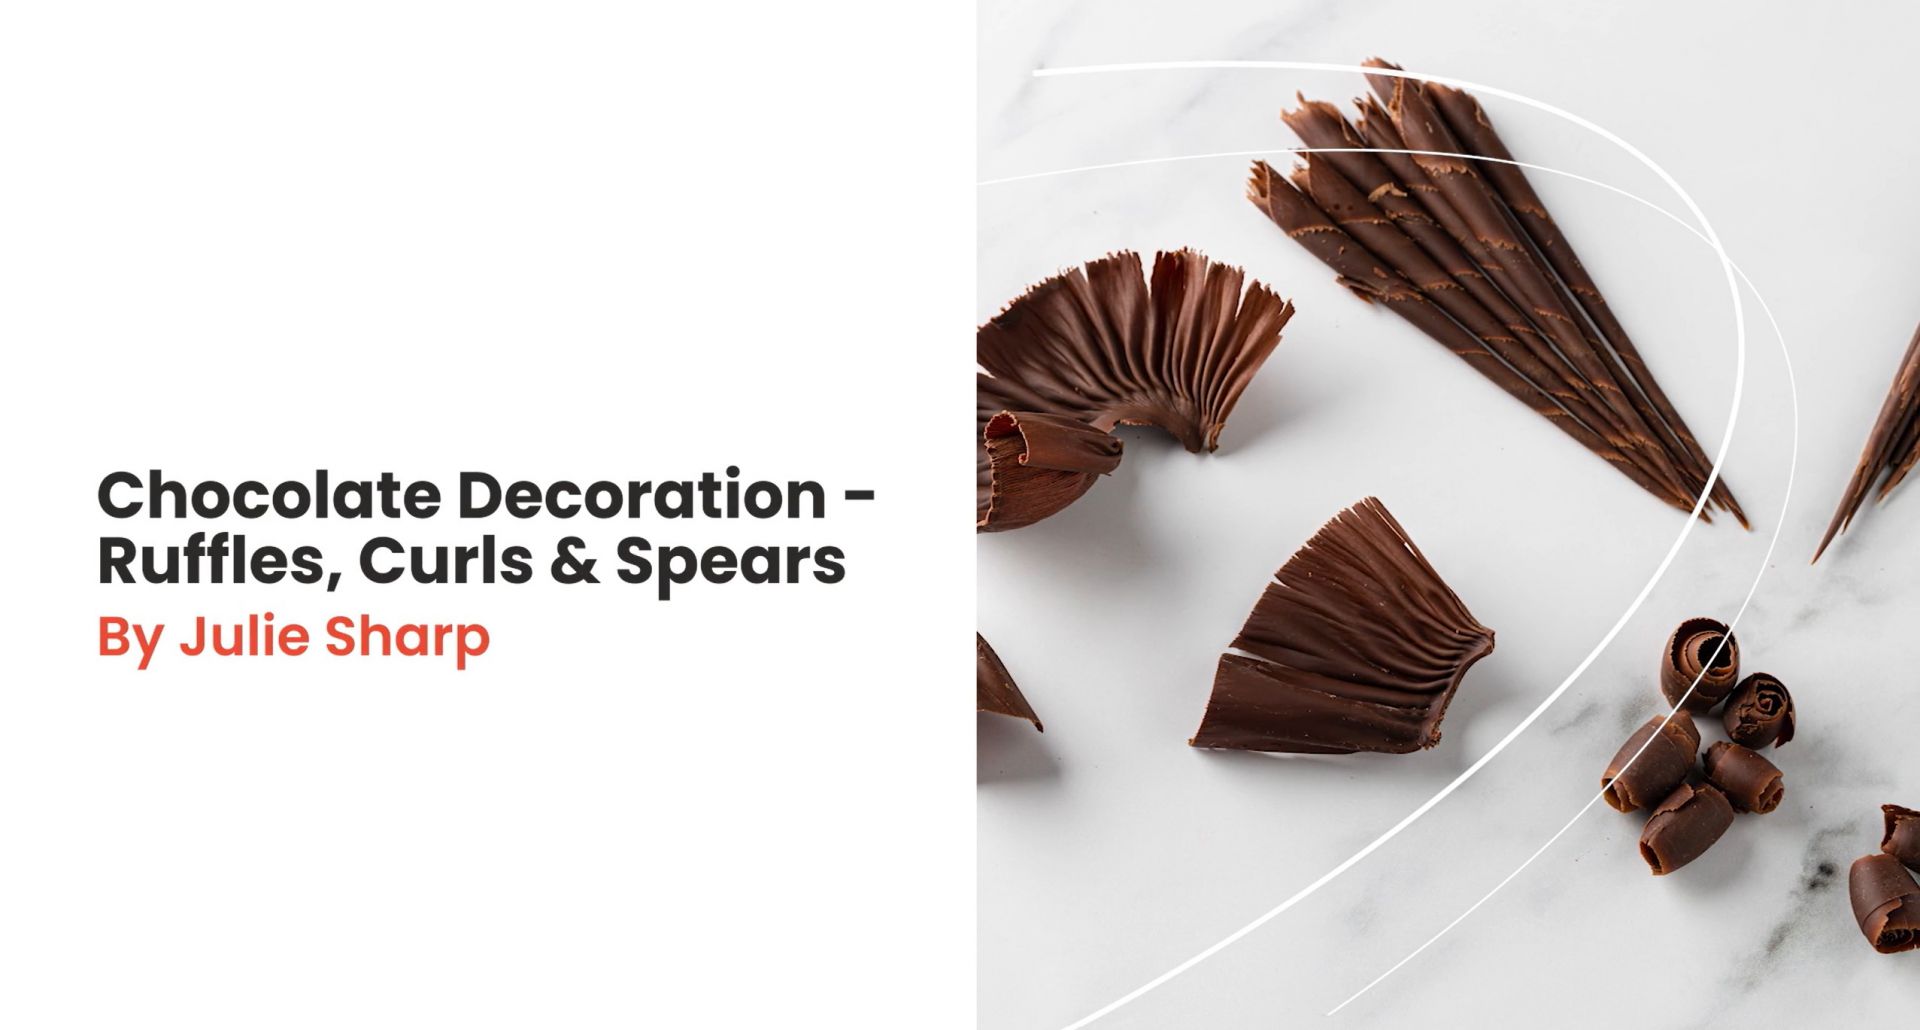 Chocolate Decoration - Ruffles, Curls and Spheres